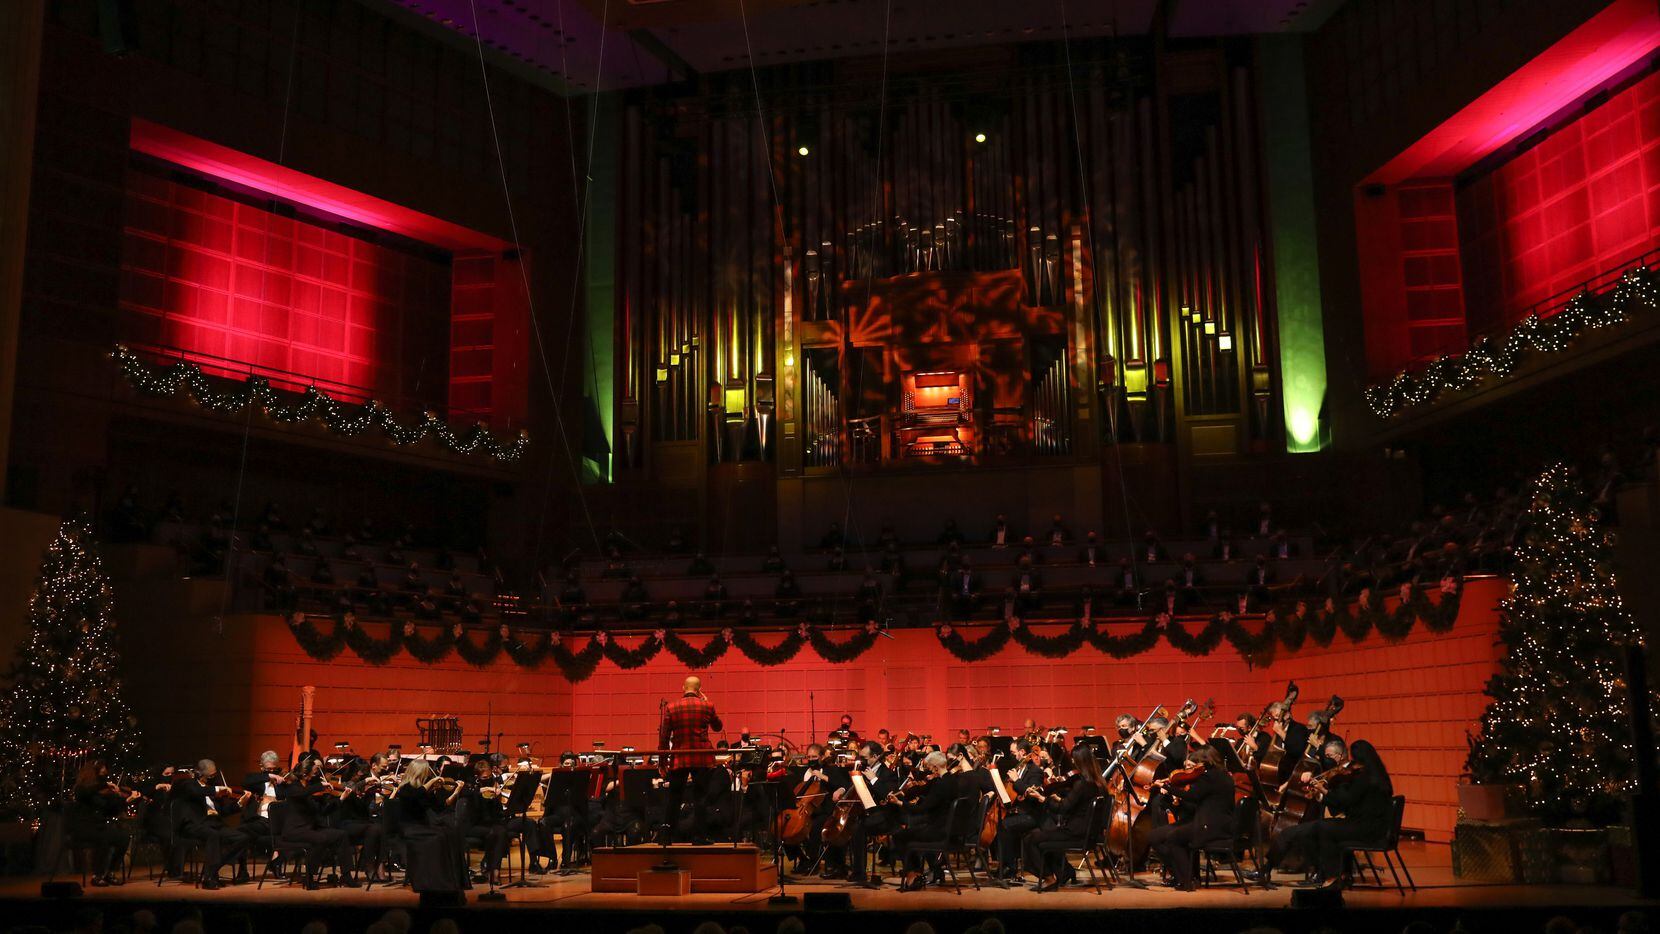 The Dallas Symphony Orchestra performs "March of the Toys" from Babes in Toyland with an accompanying light show at the Dallas Symphony Christmas Pops concert on Dec. 3, 2021.